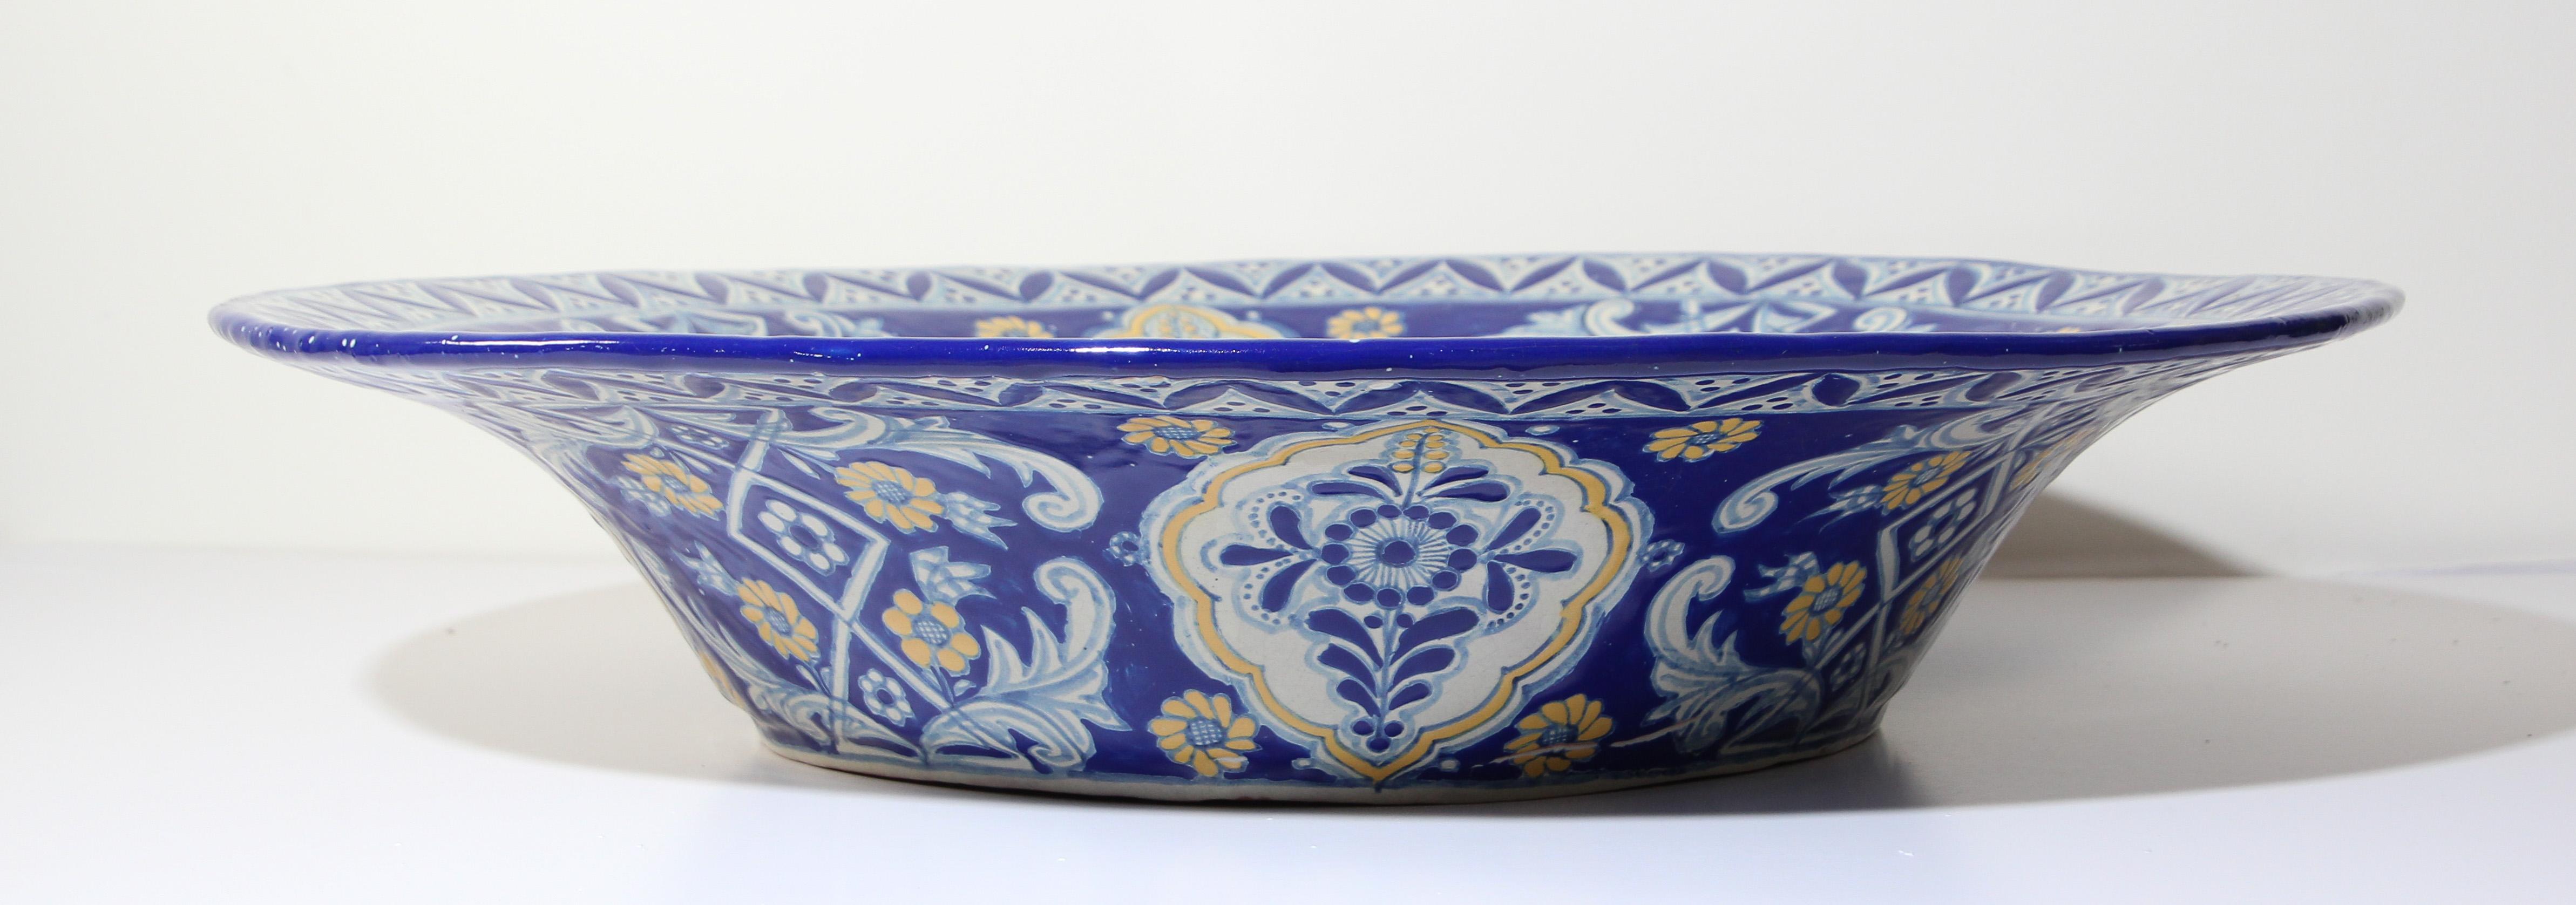 Hand-Painted Oversized Blue and White Mexican Talavera Glazed Ceramic Bowl For Sale